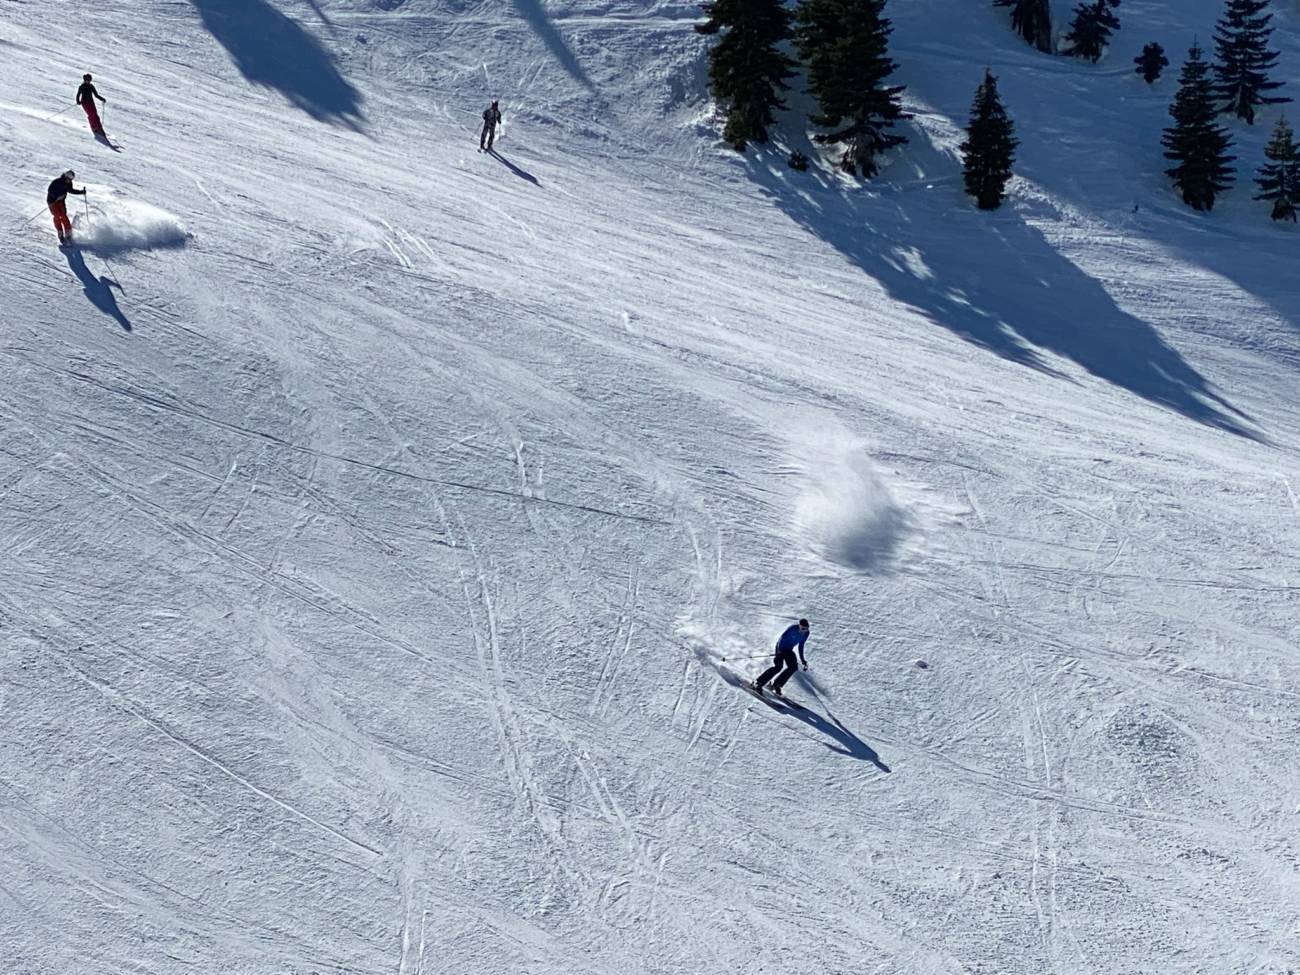 Conditions are spring skiing-like at Alpine.